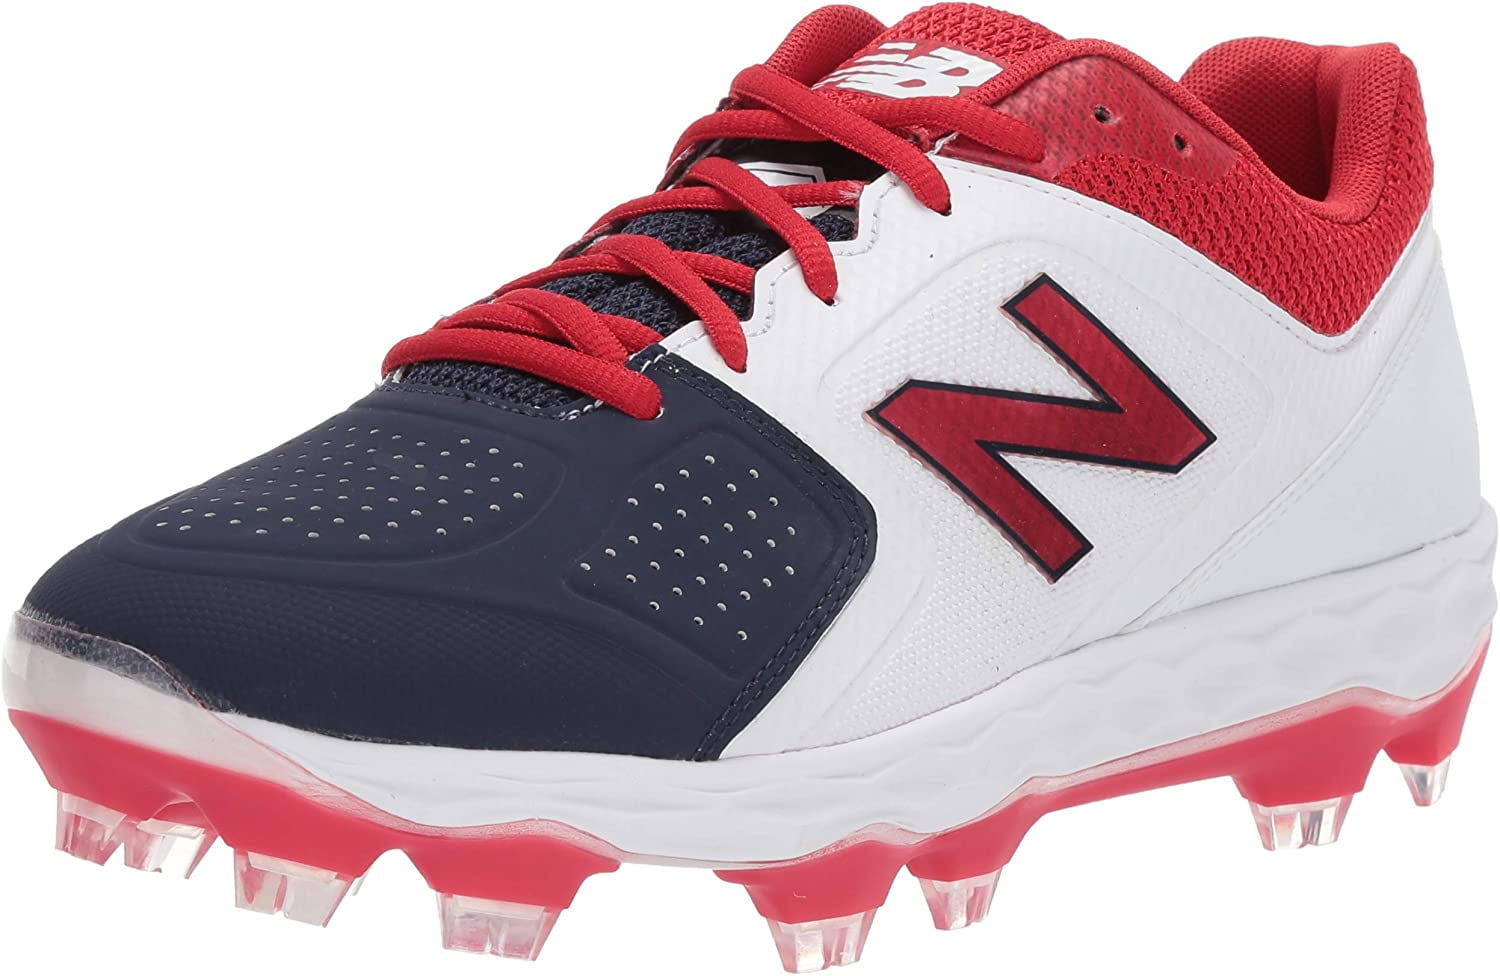 red white and blue molded baseball cleats